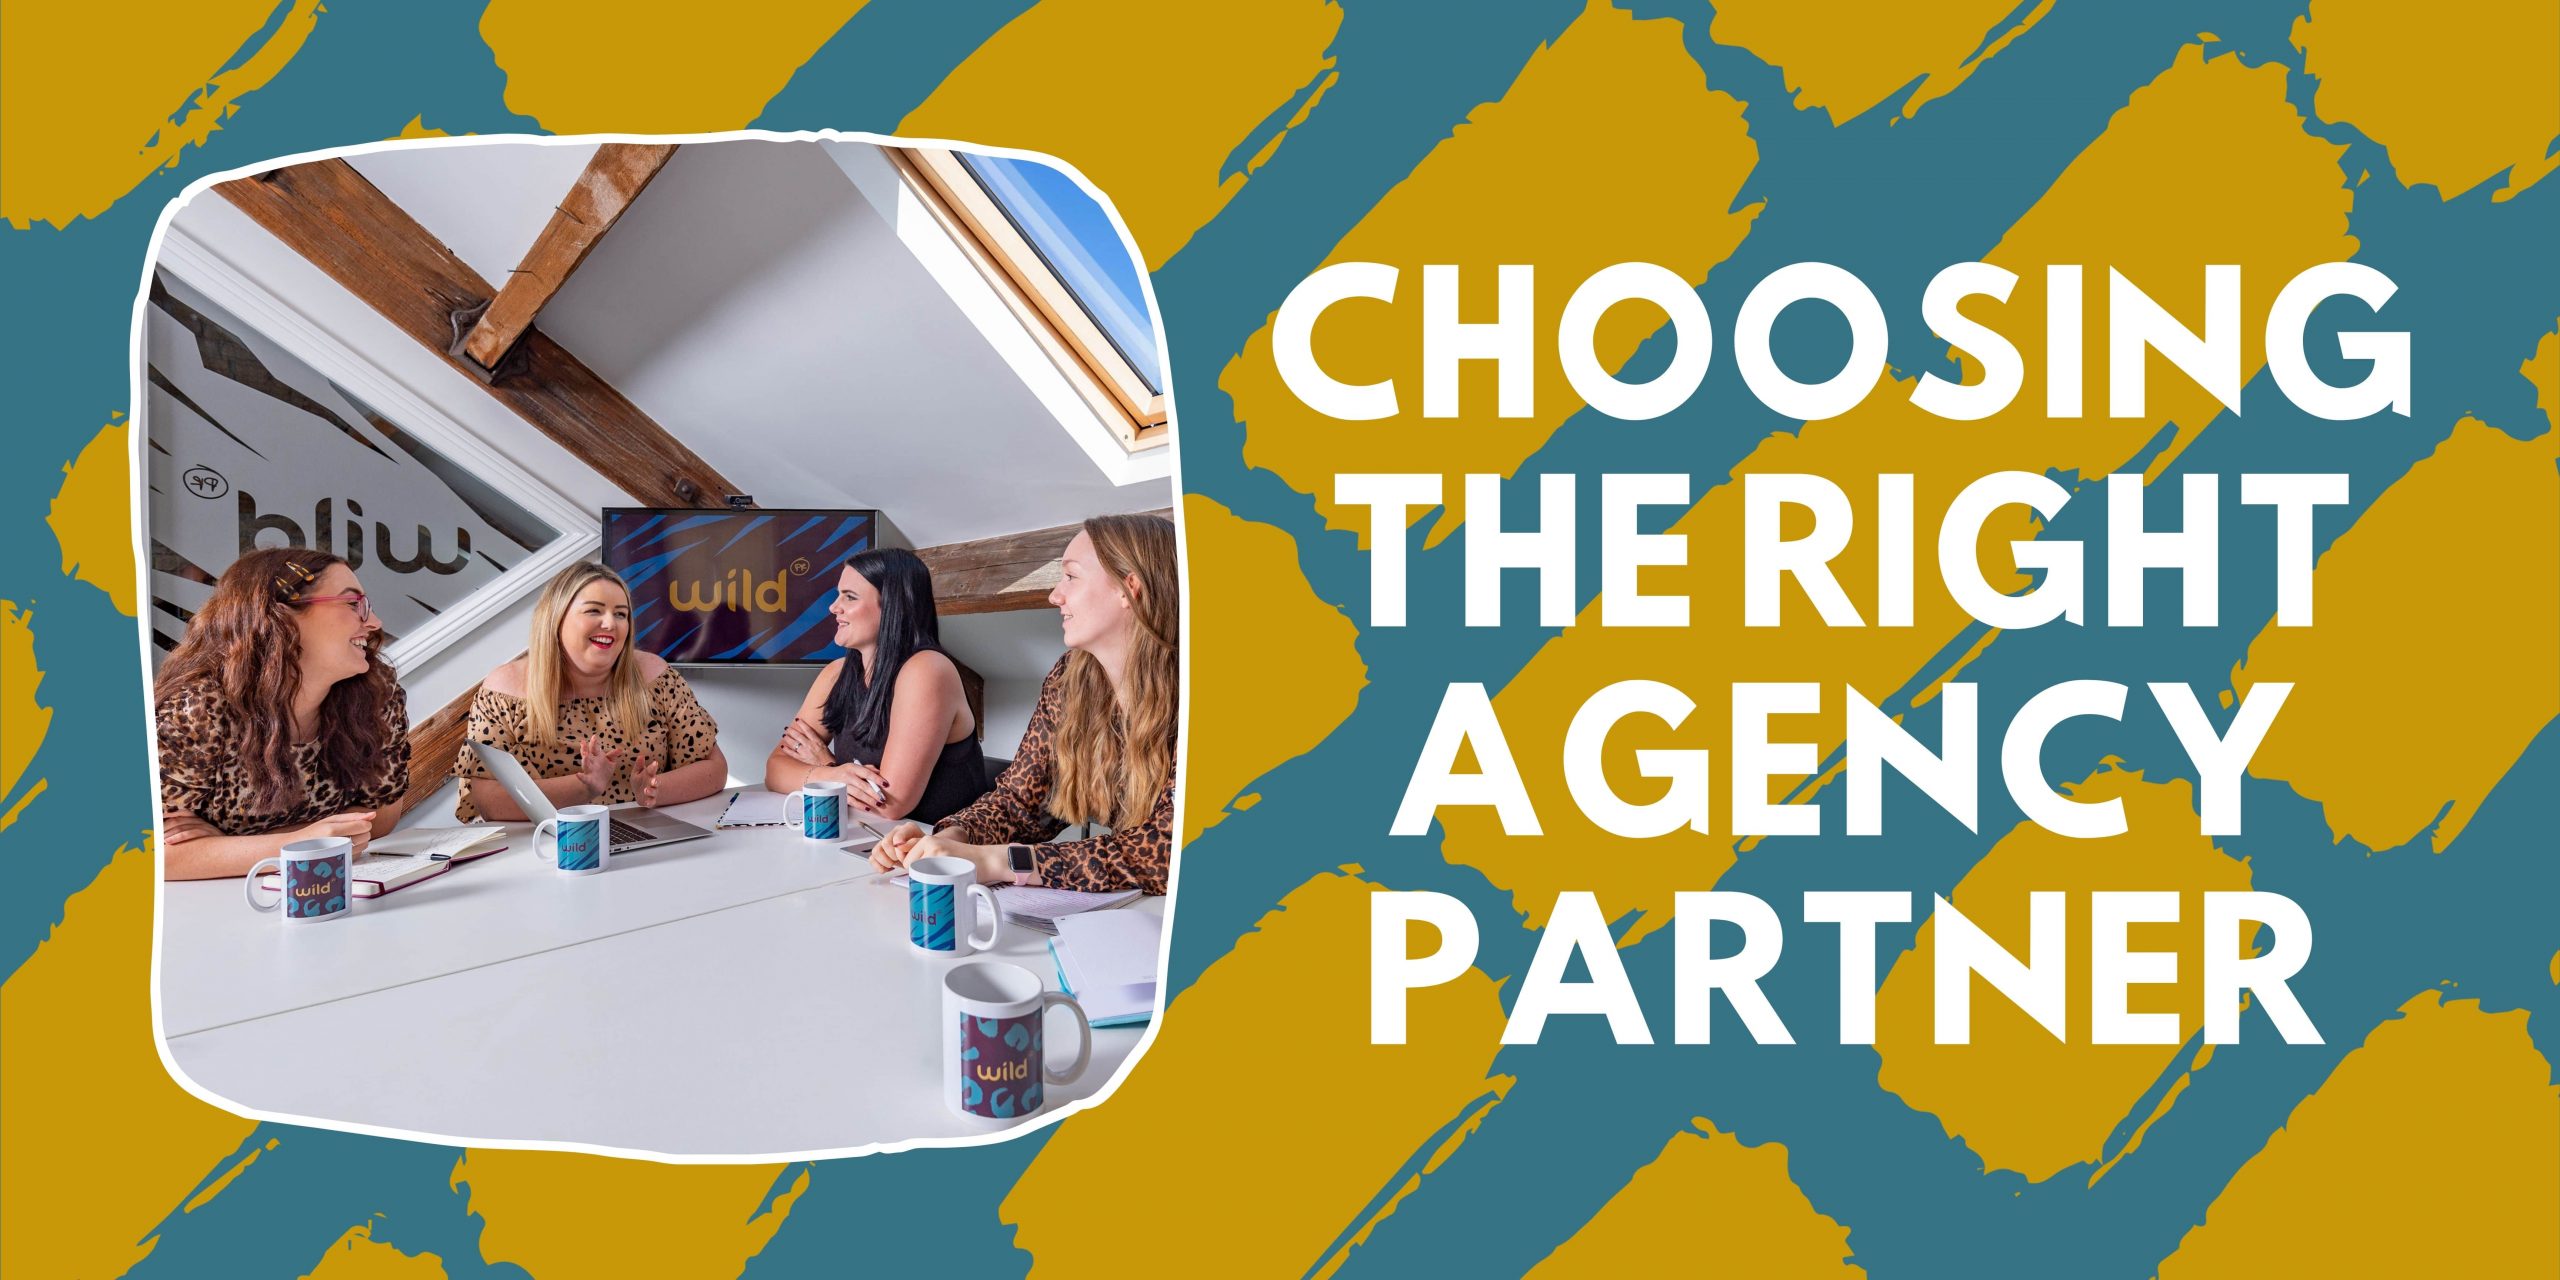 How to choose the right PR agency partner for your business